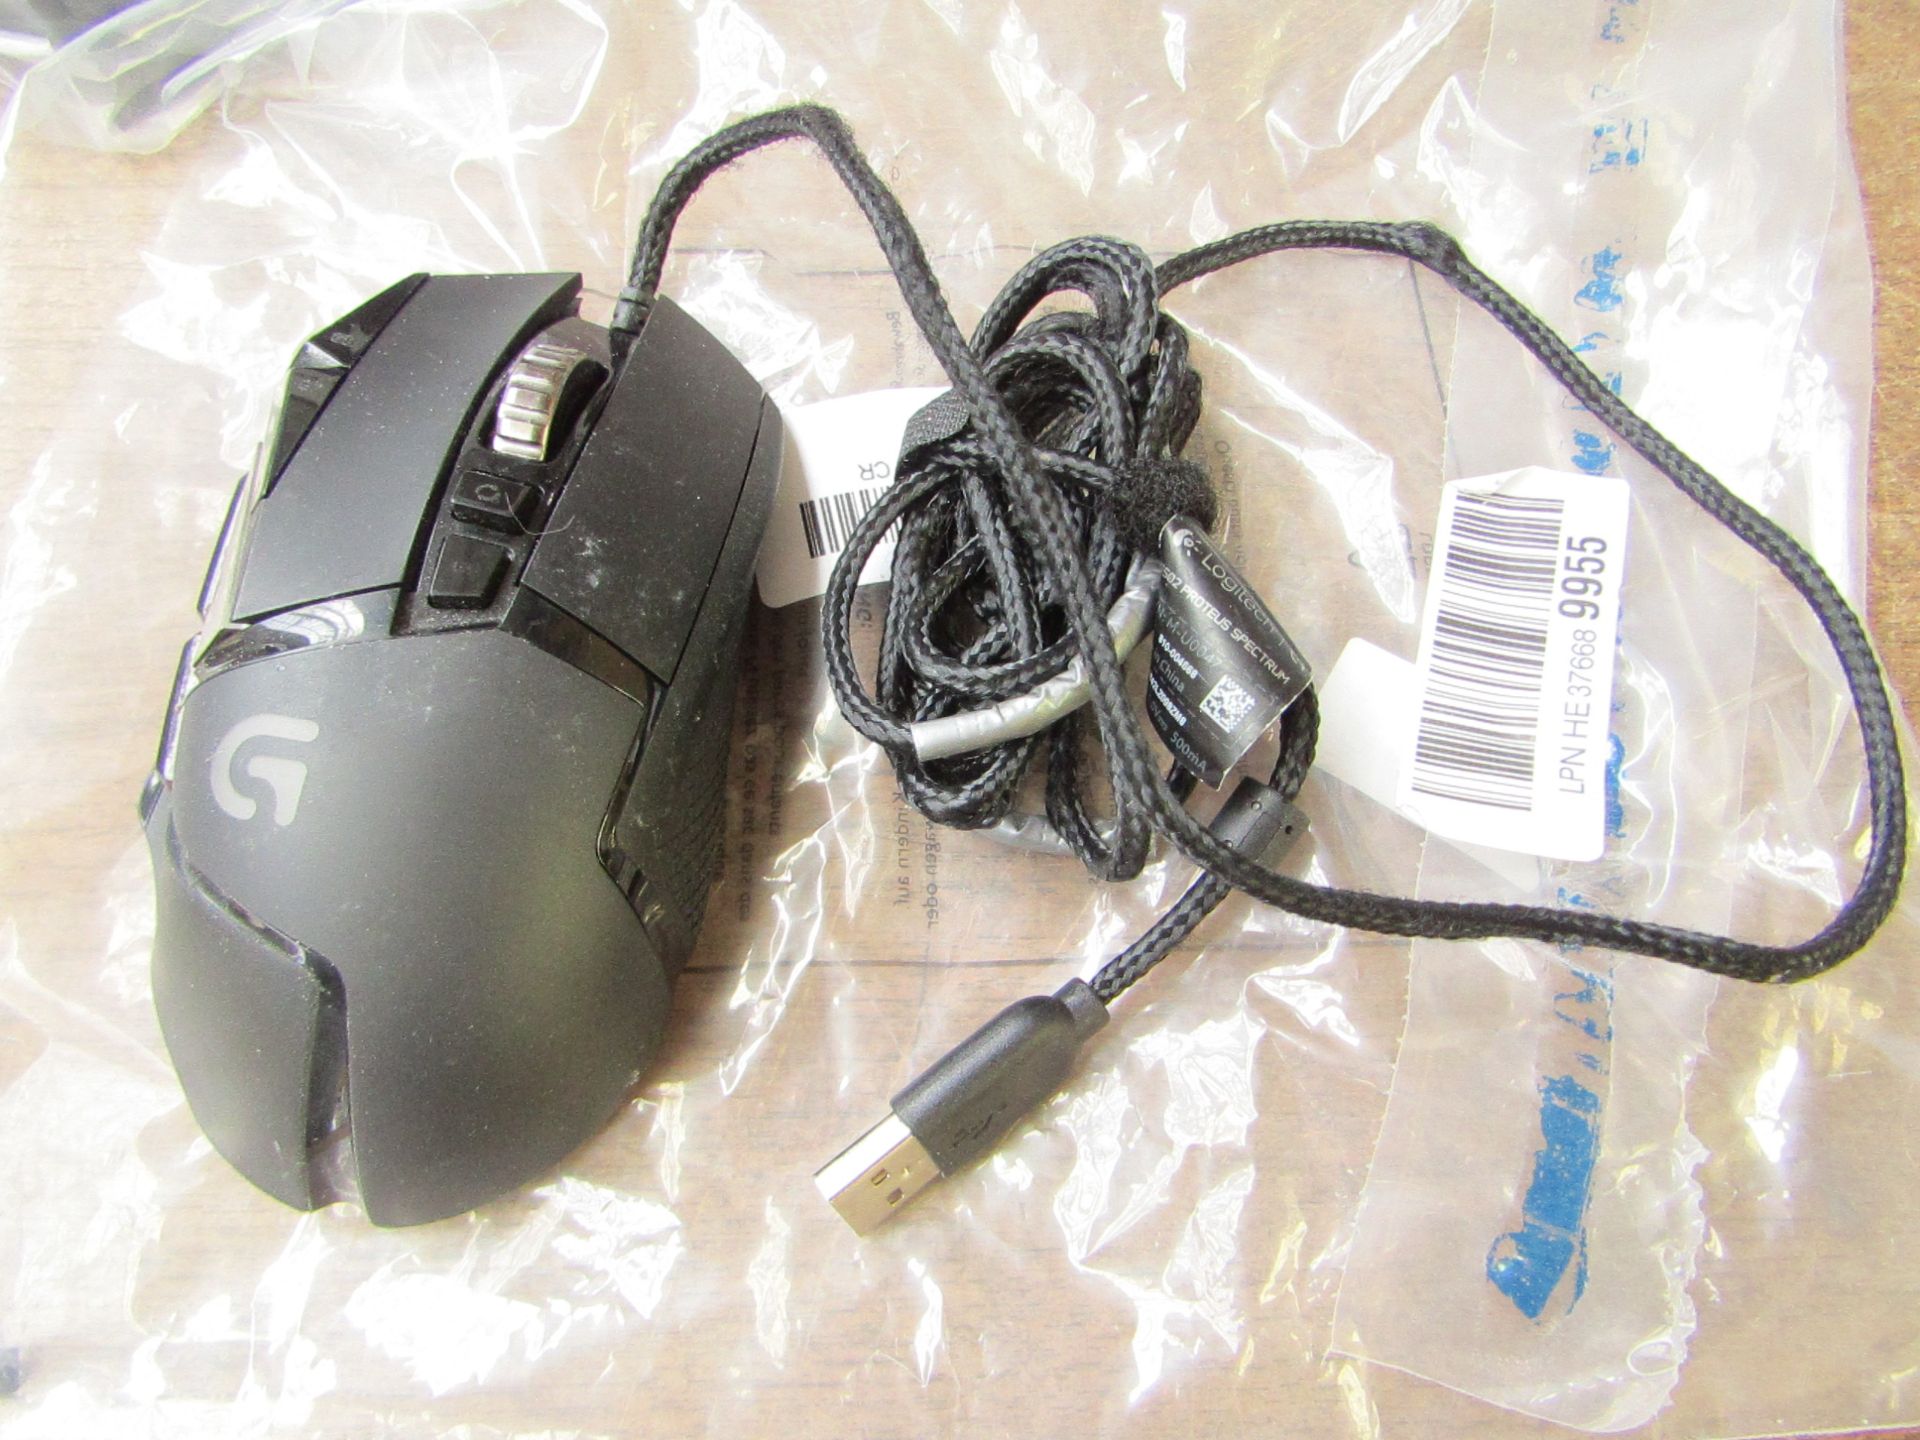 Logitech - G502 Wired Gaming Mouse (Wire Has some Damage) Tested Working & Packaged.